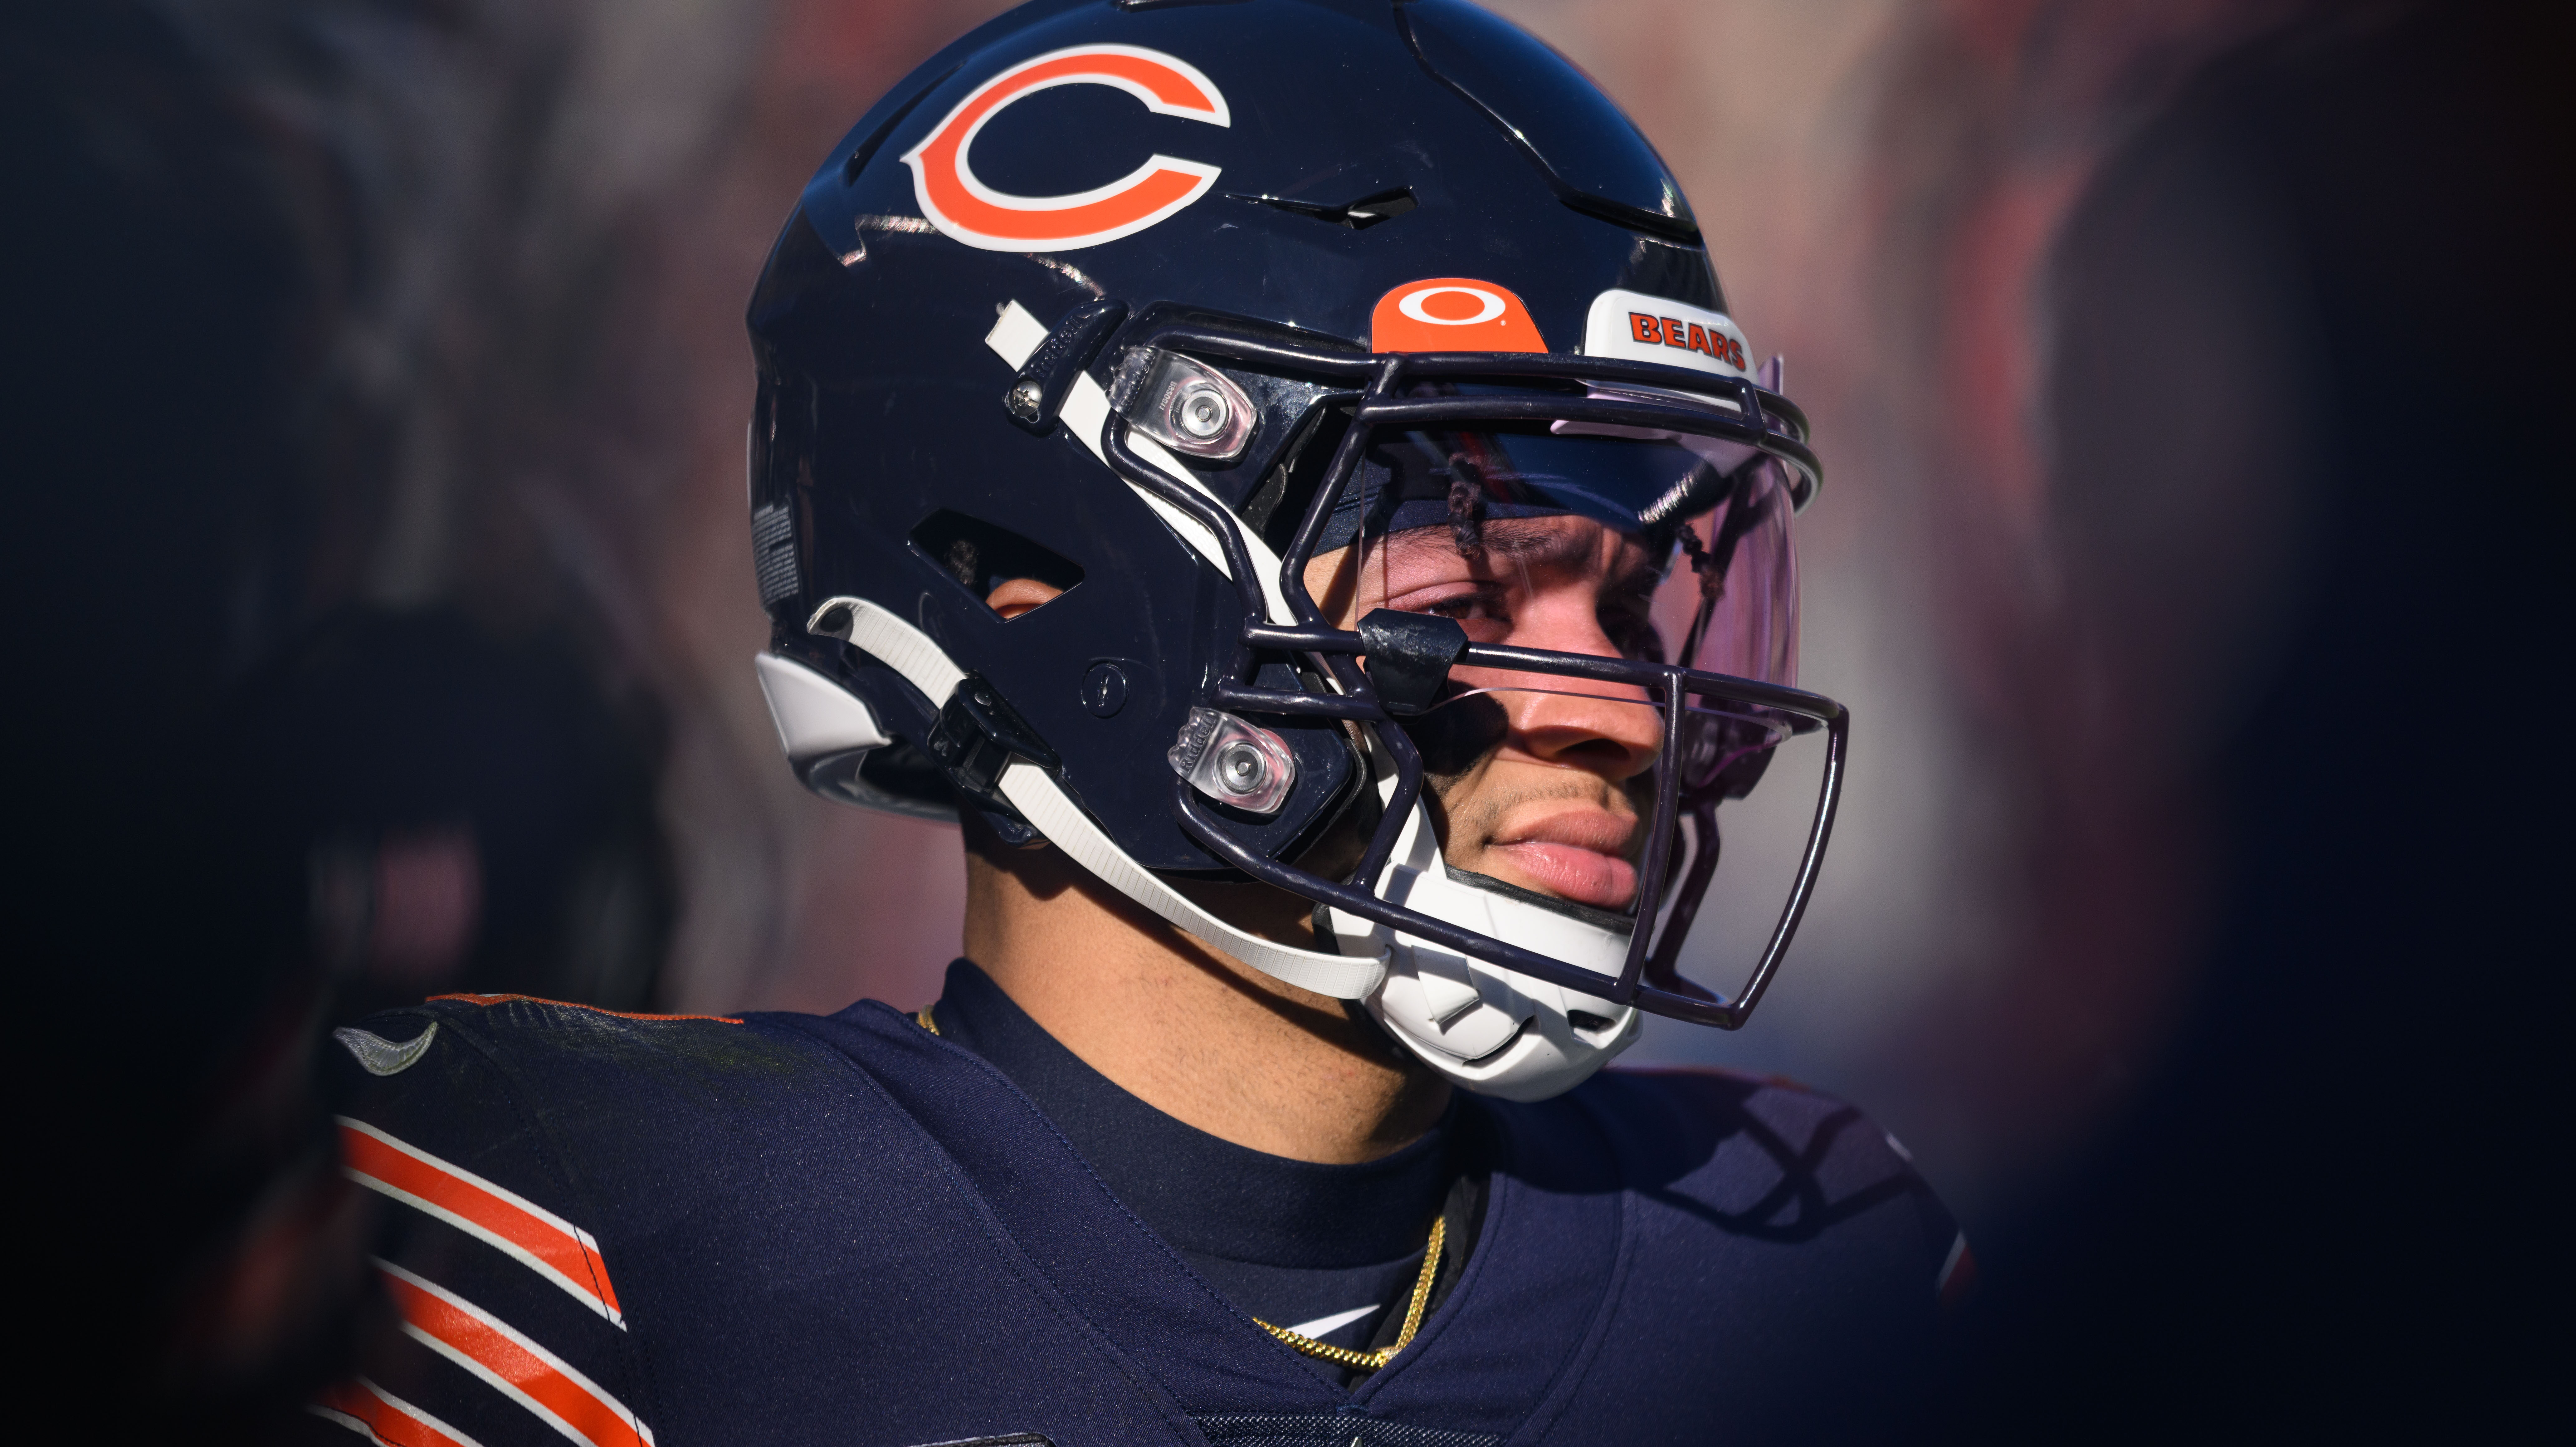 Bears QB Justin Fields looks to his left with his helmet on